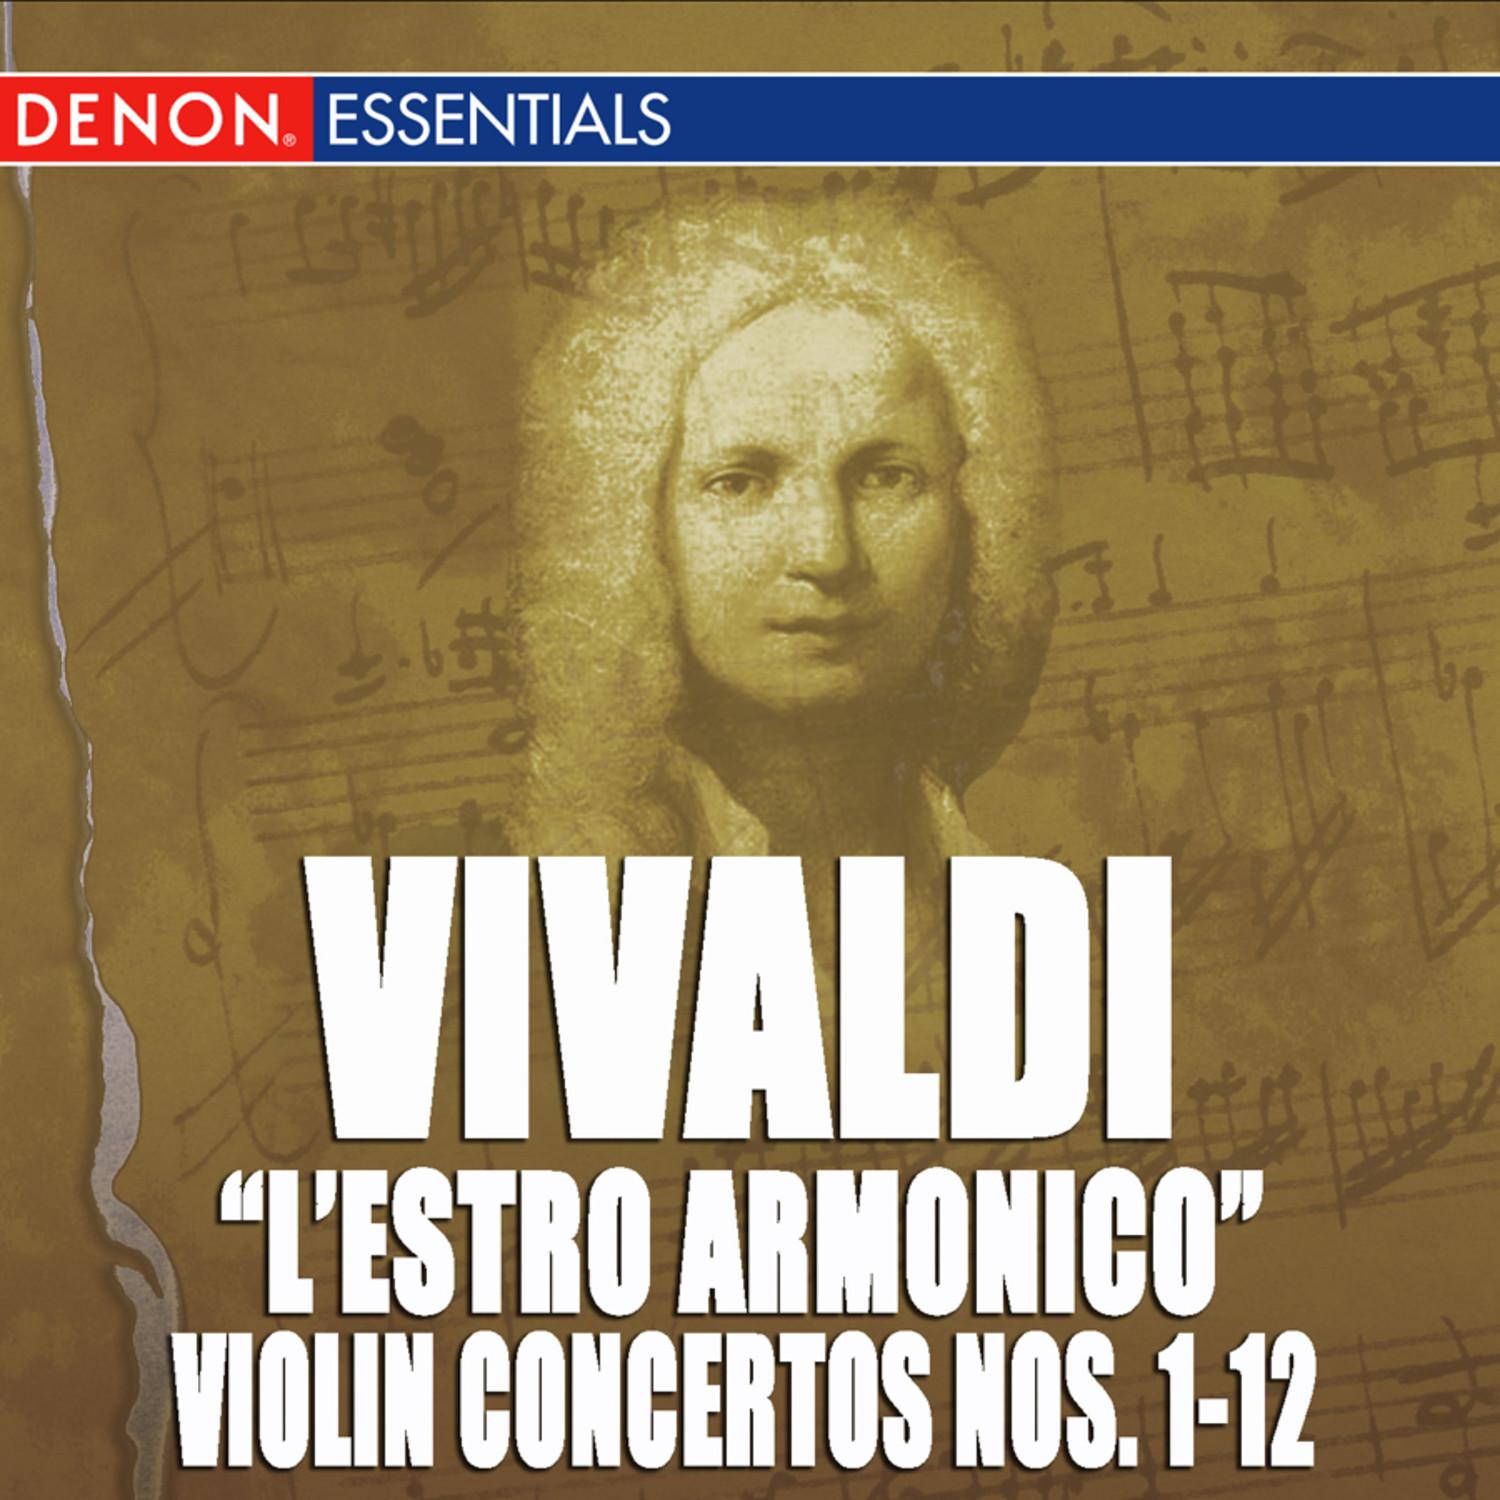 Concerto for 2 Violins, Strings & B.c. No. 2 in G Minor, Op. 3 RV 578: III. Larghetto